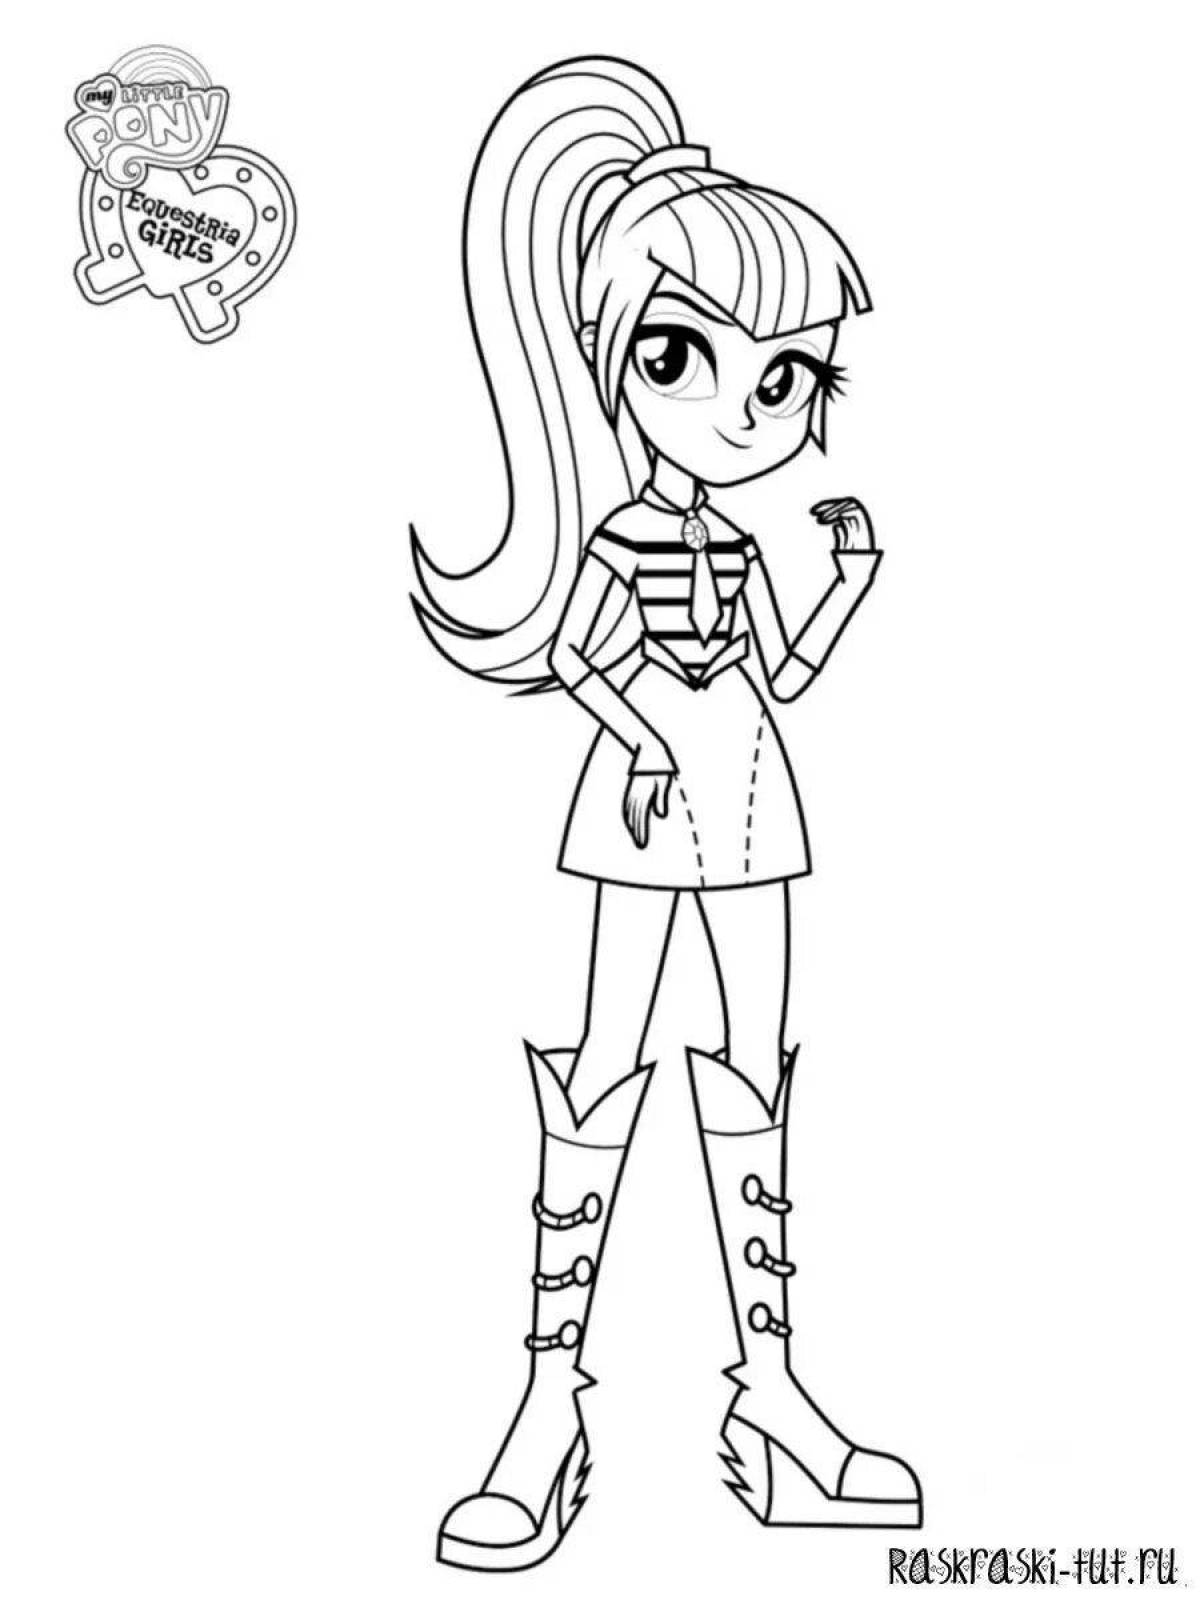 Adorable pony doll coloring page